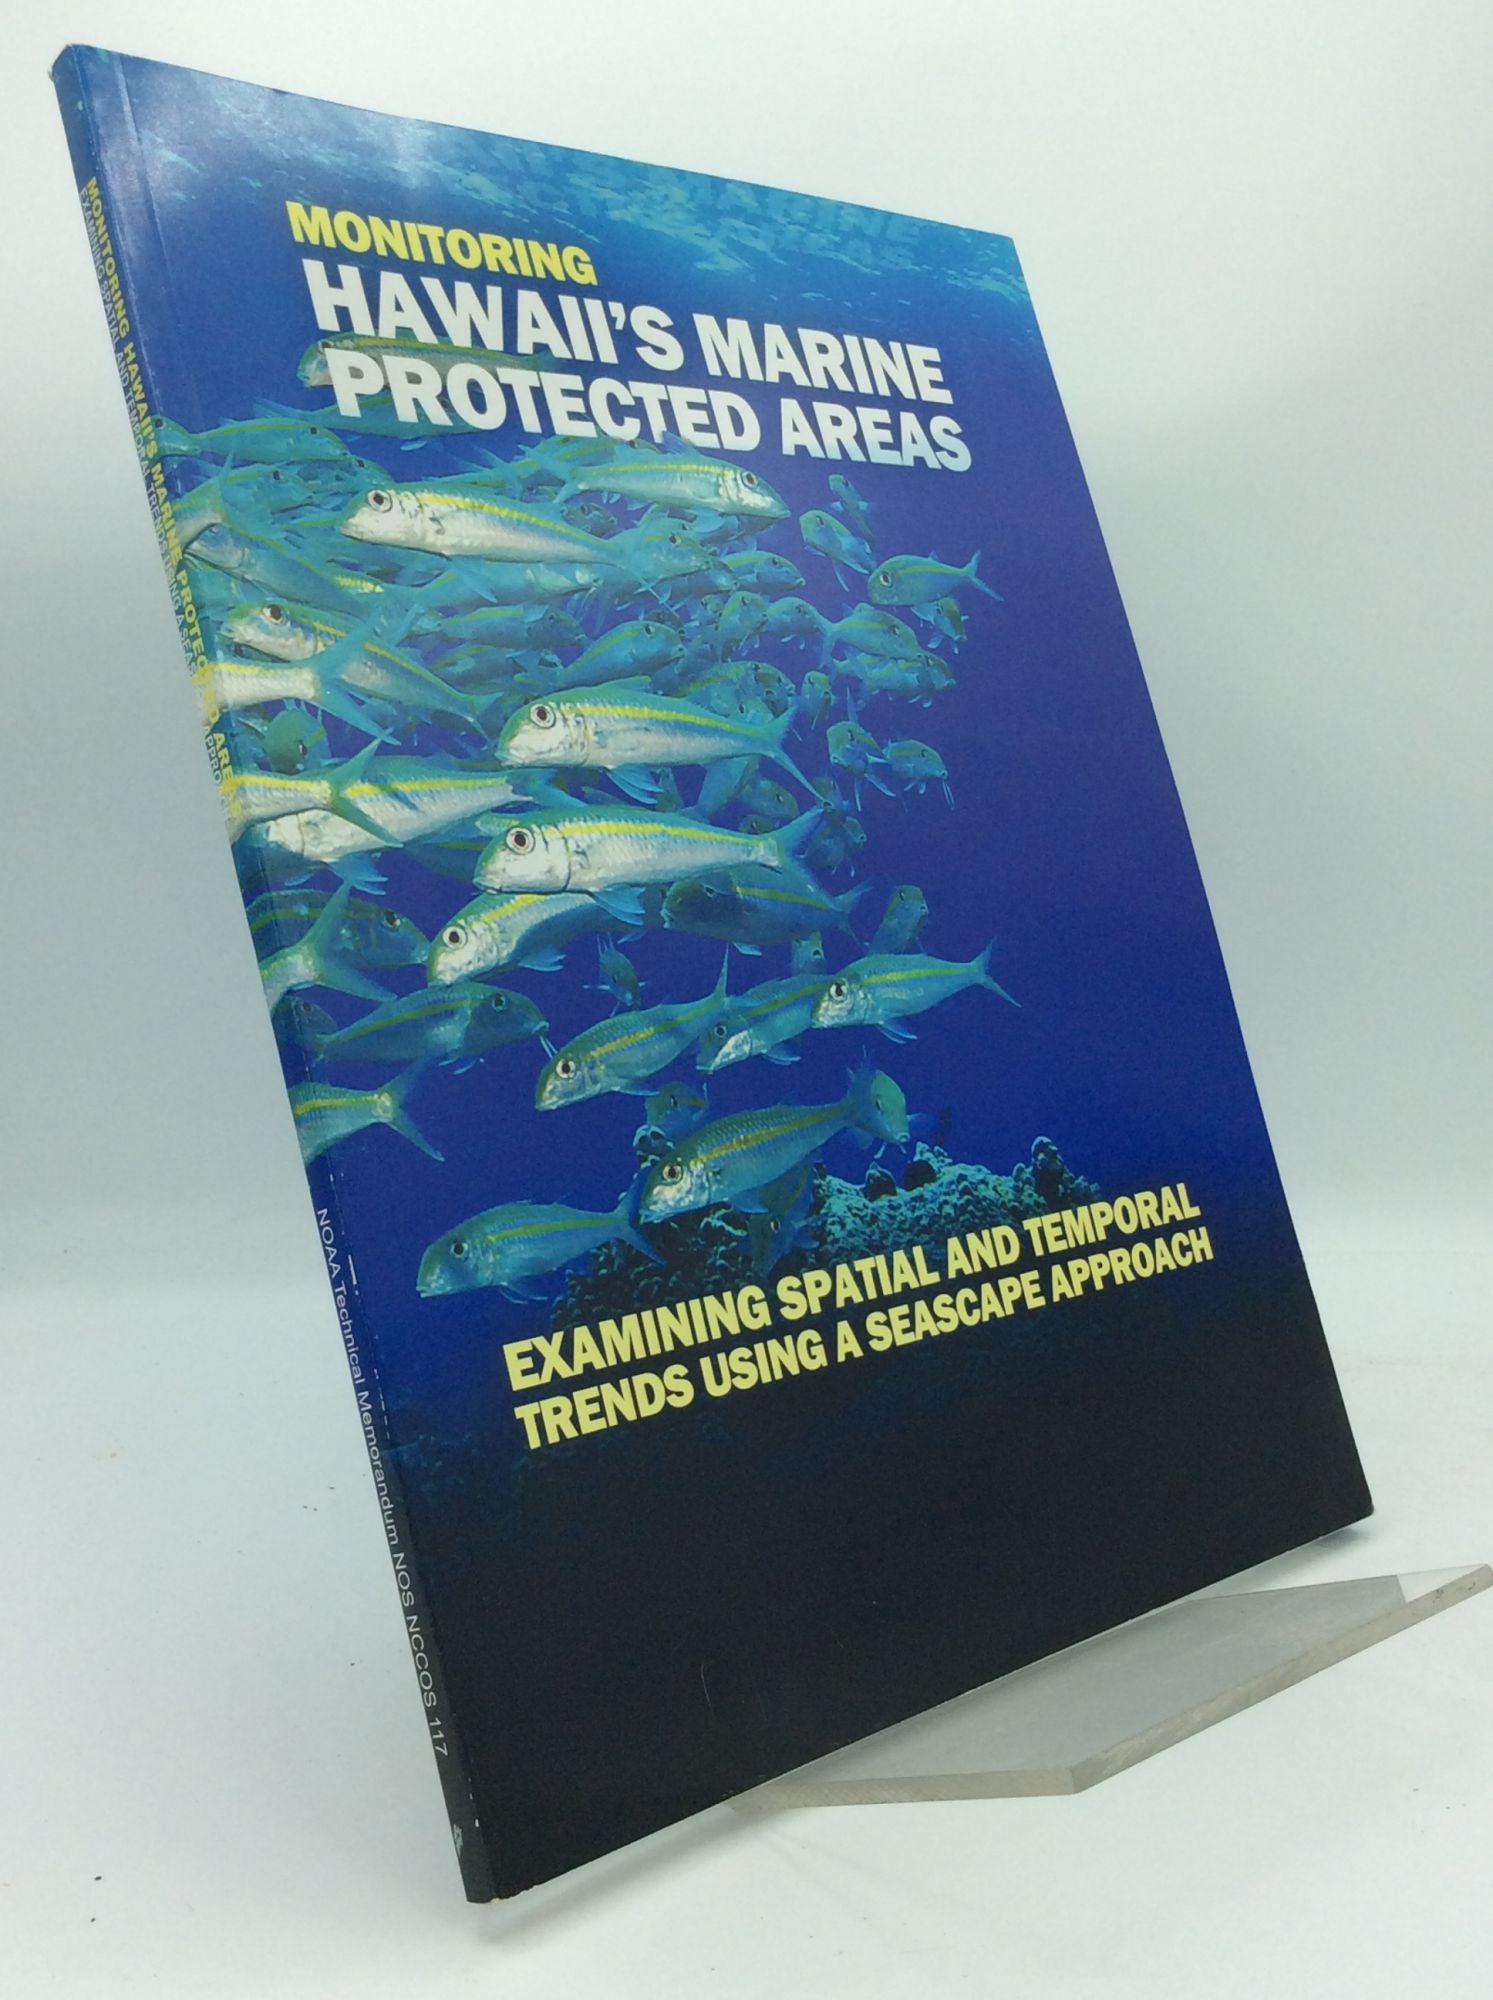 Alan M. Friedlander, et al. - Monitoring Hawaii's Marine Protected Areas: Examining Spatial and Temporal Trends Using a Seascape Approach